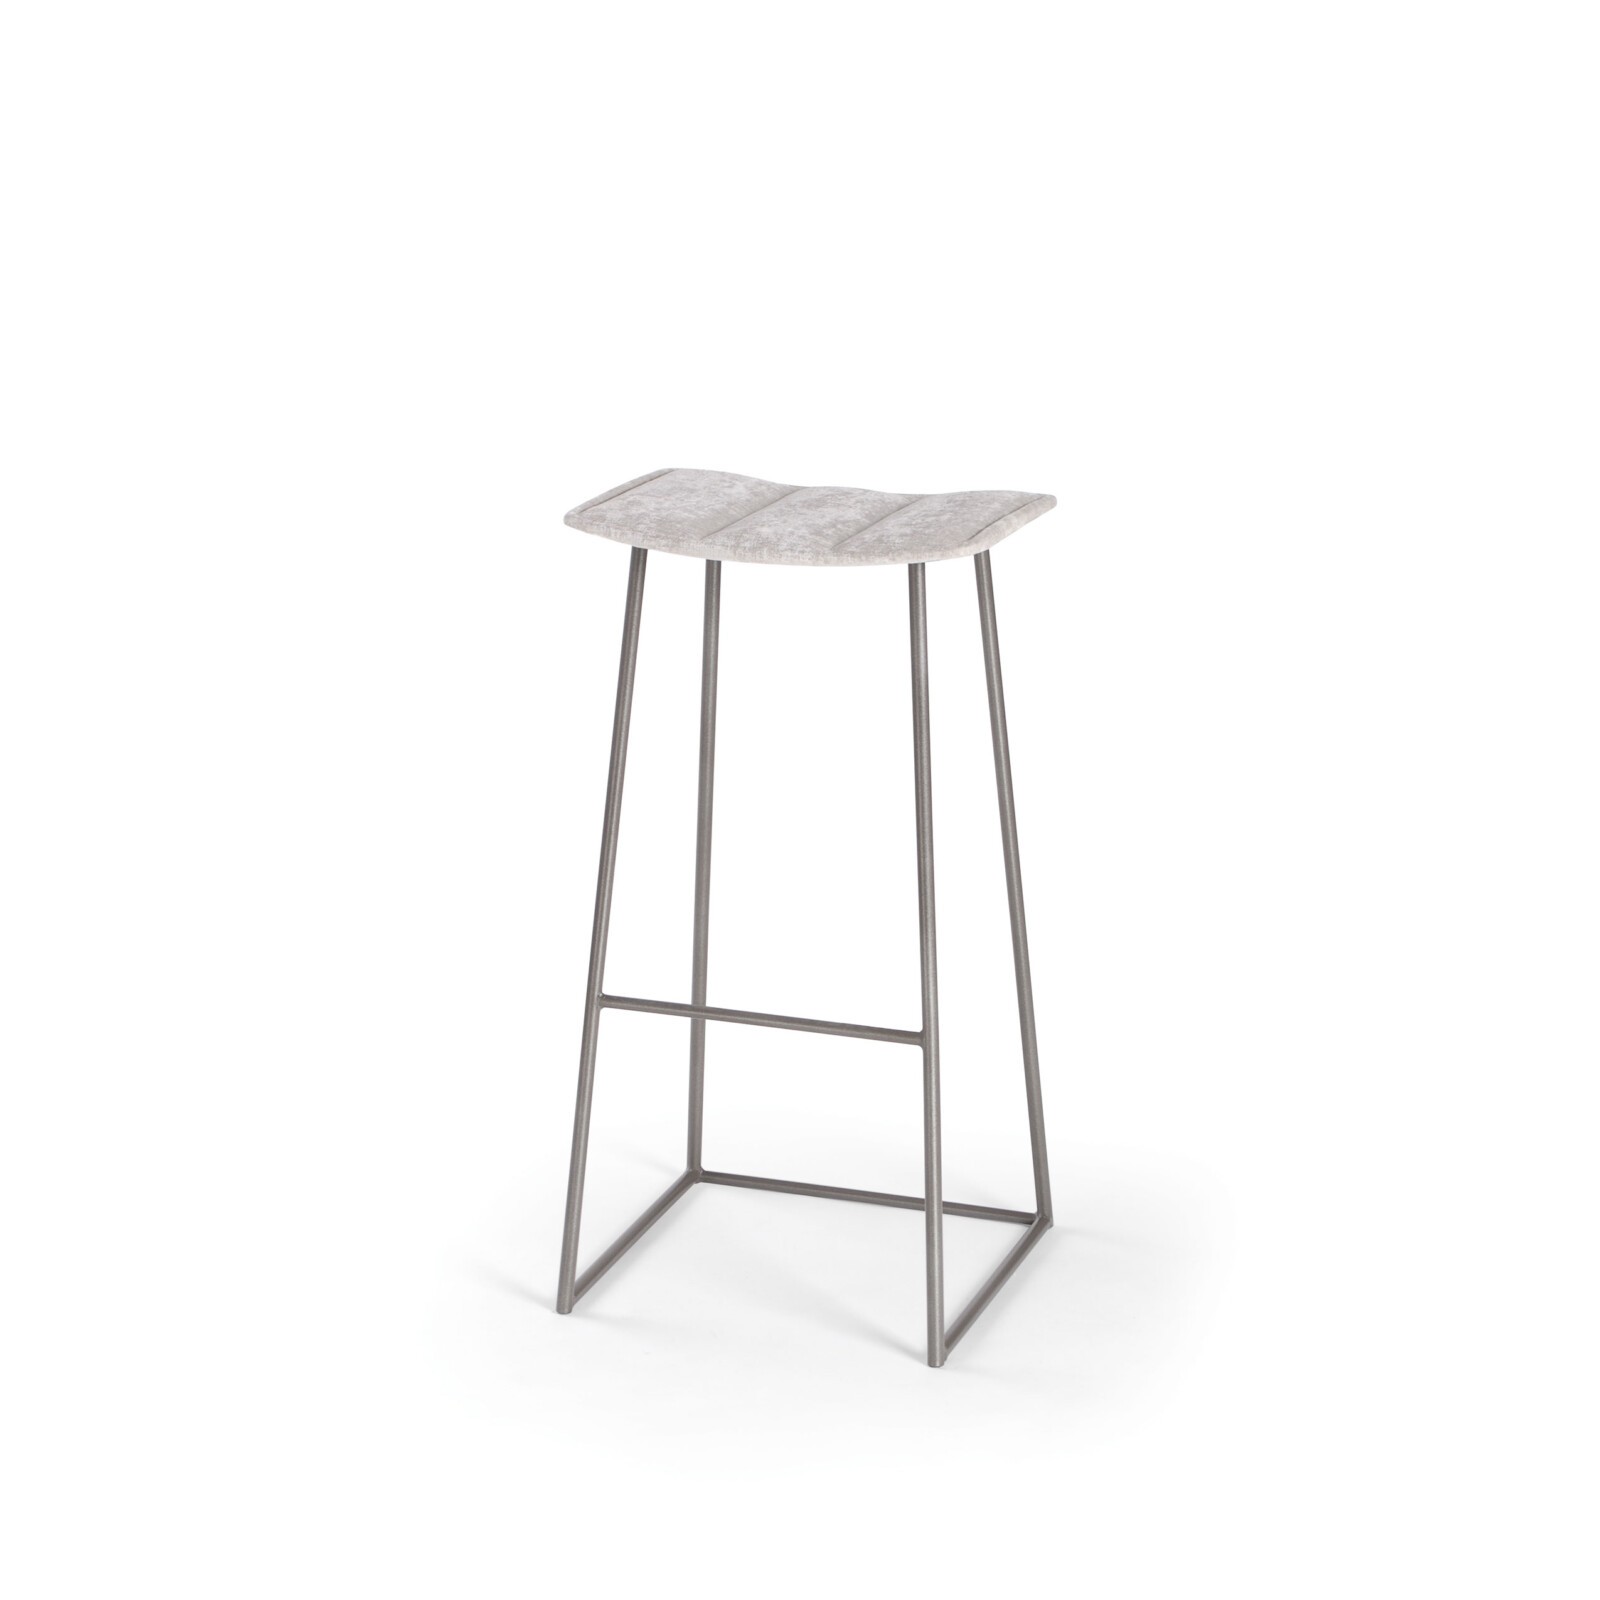 Shown here: Palmo stool in Champagne and Venice 61.